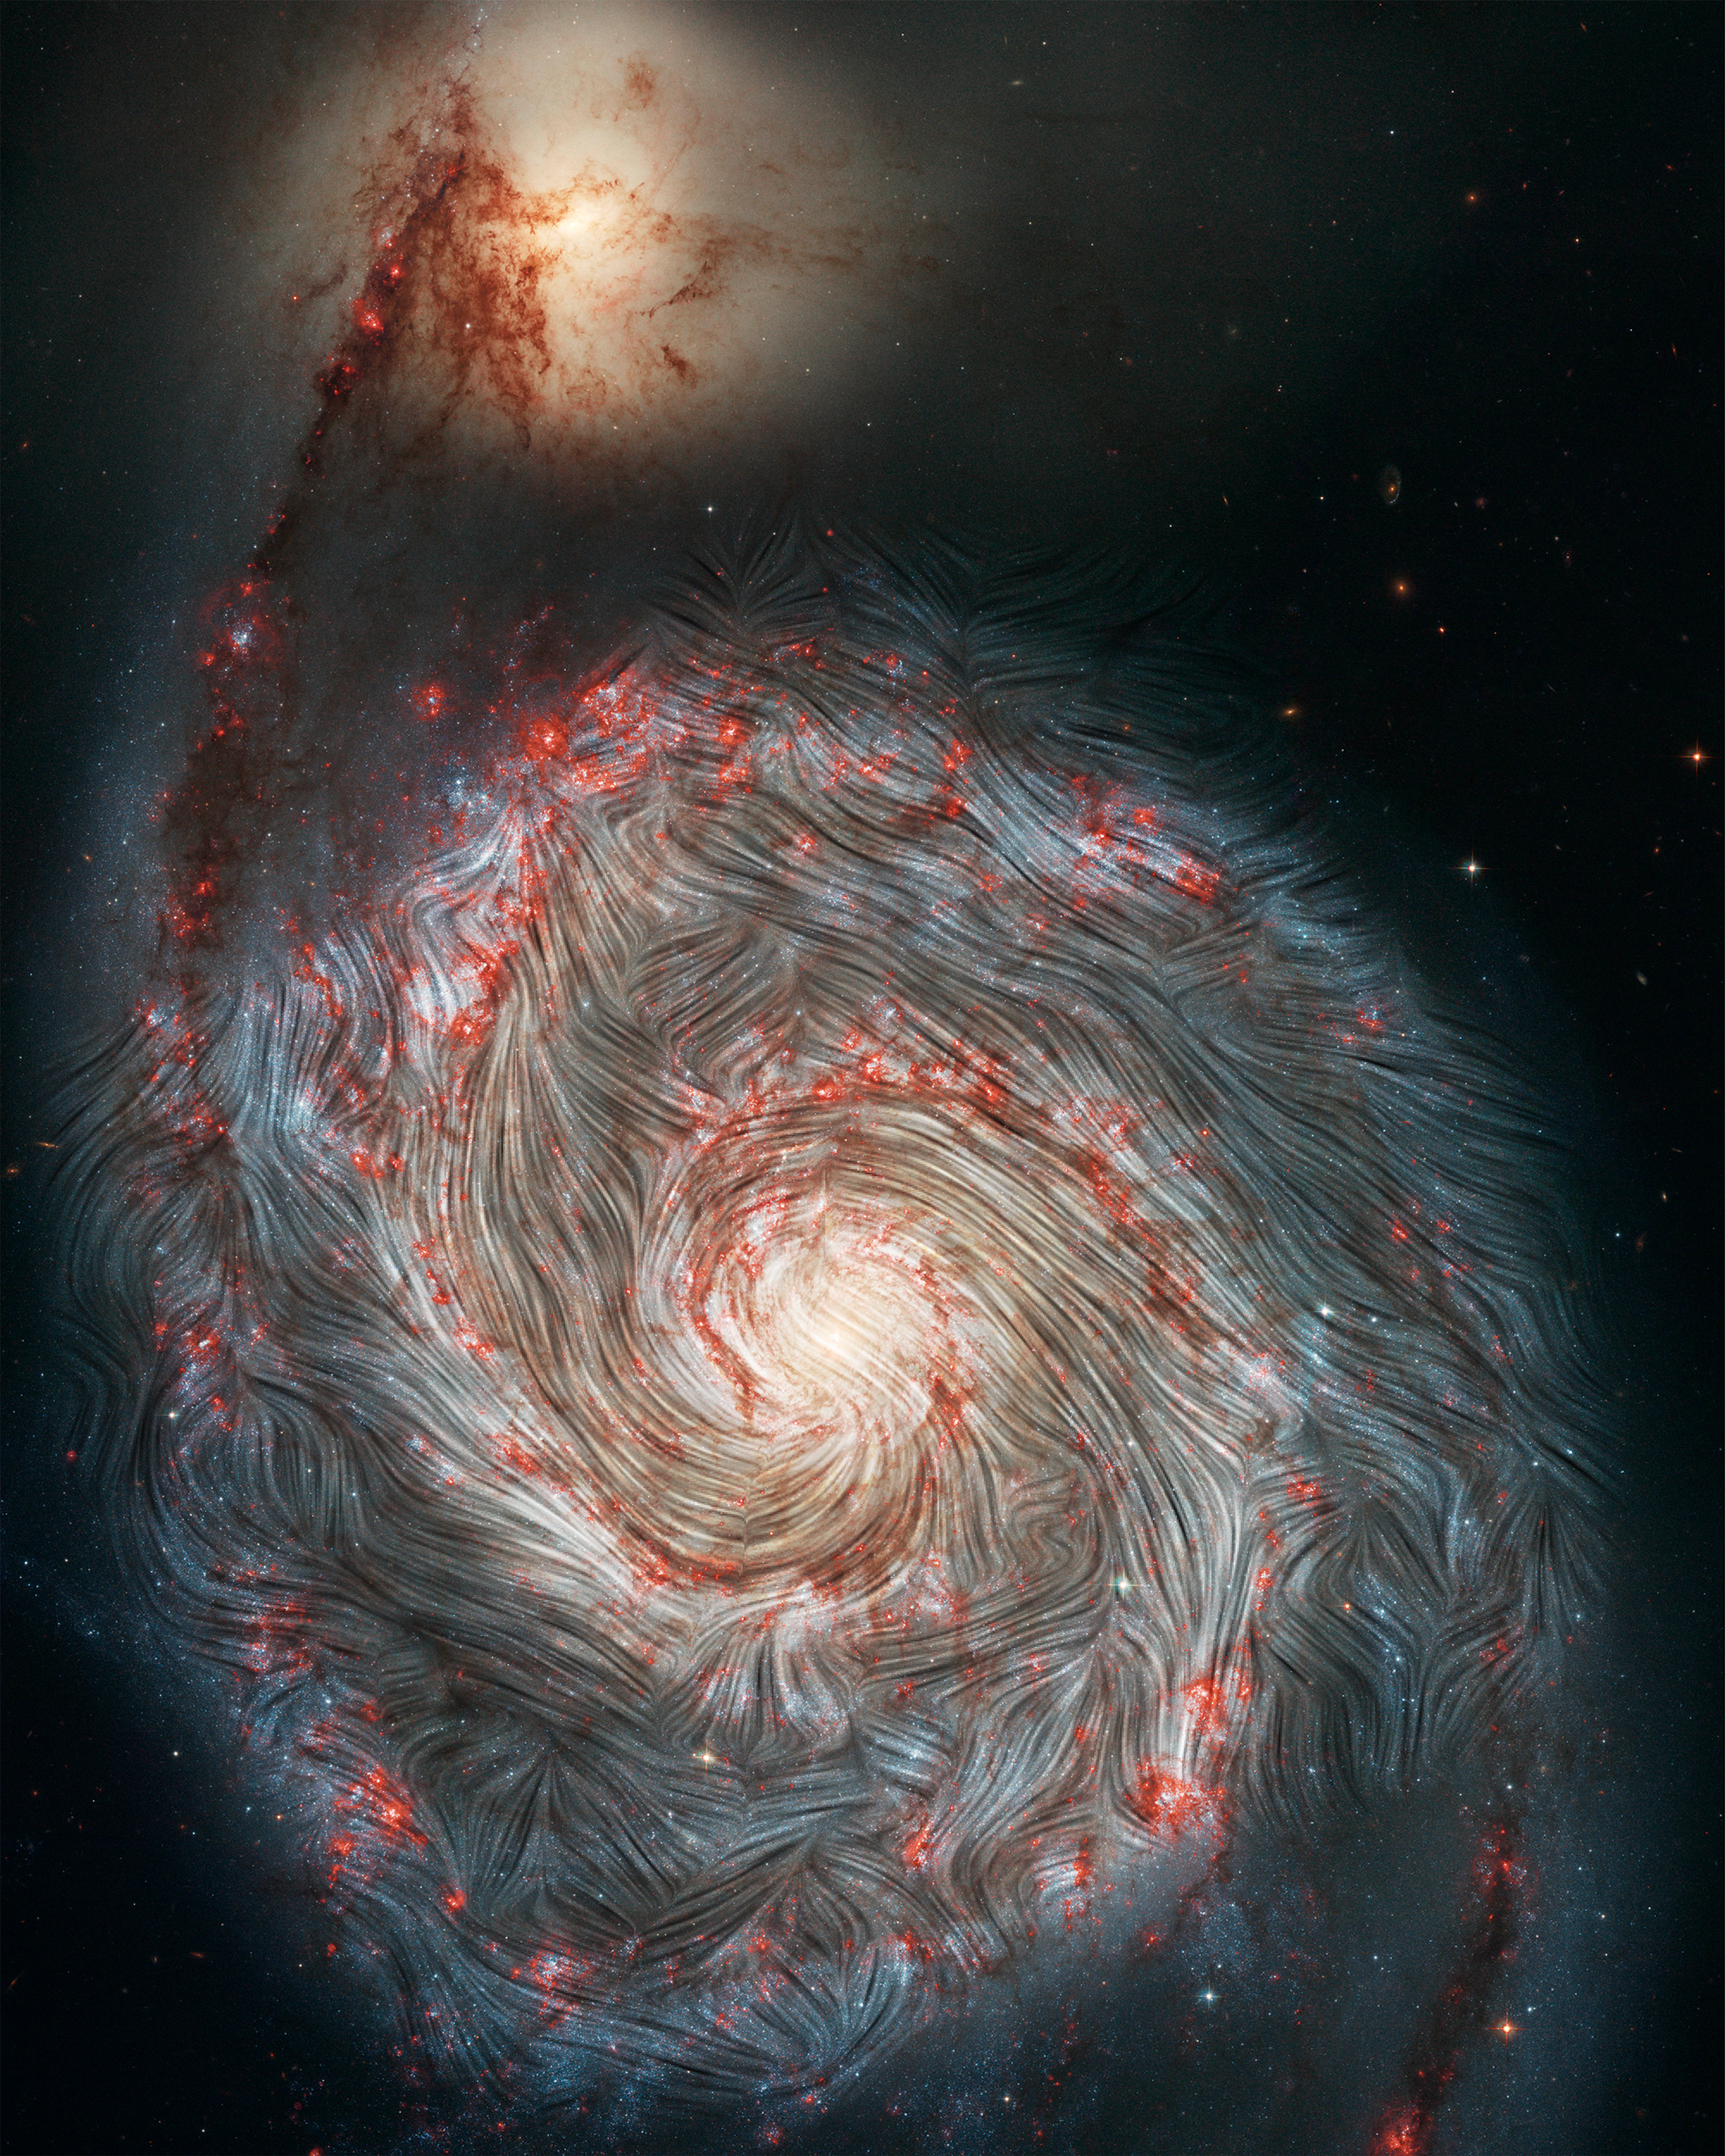 Magnetic field streamlines detected by SOFIA are shown over an image of the Whirlpool galaxy, M51, from NASA’s Hubble Space Telescope.